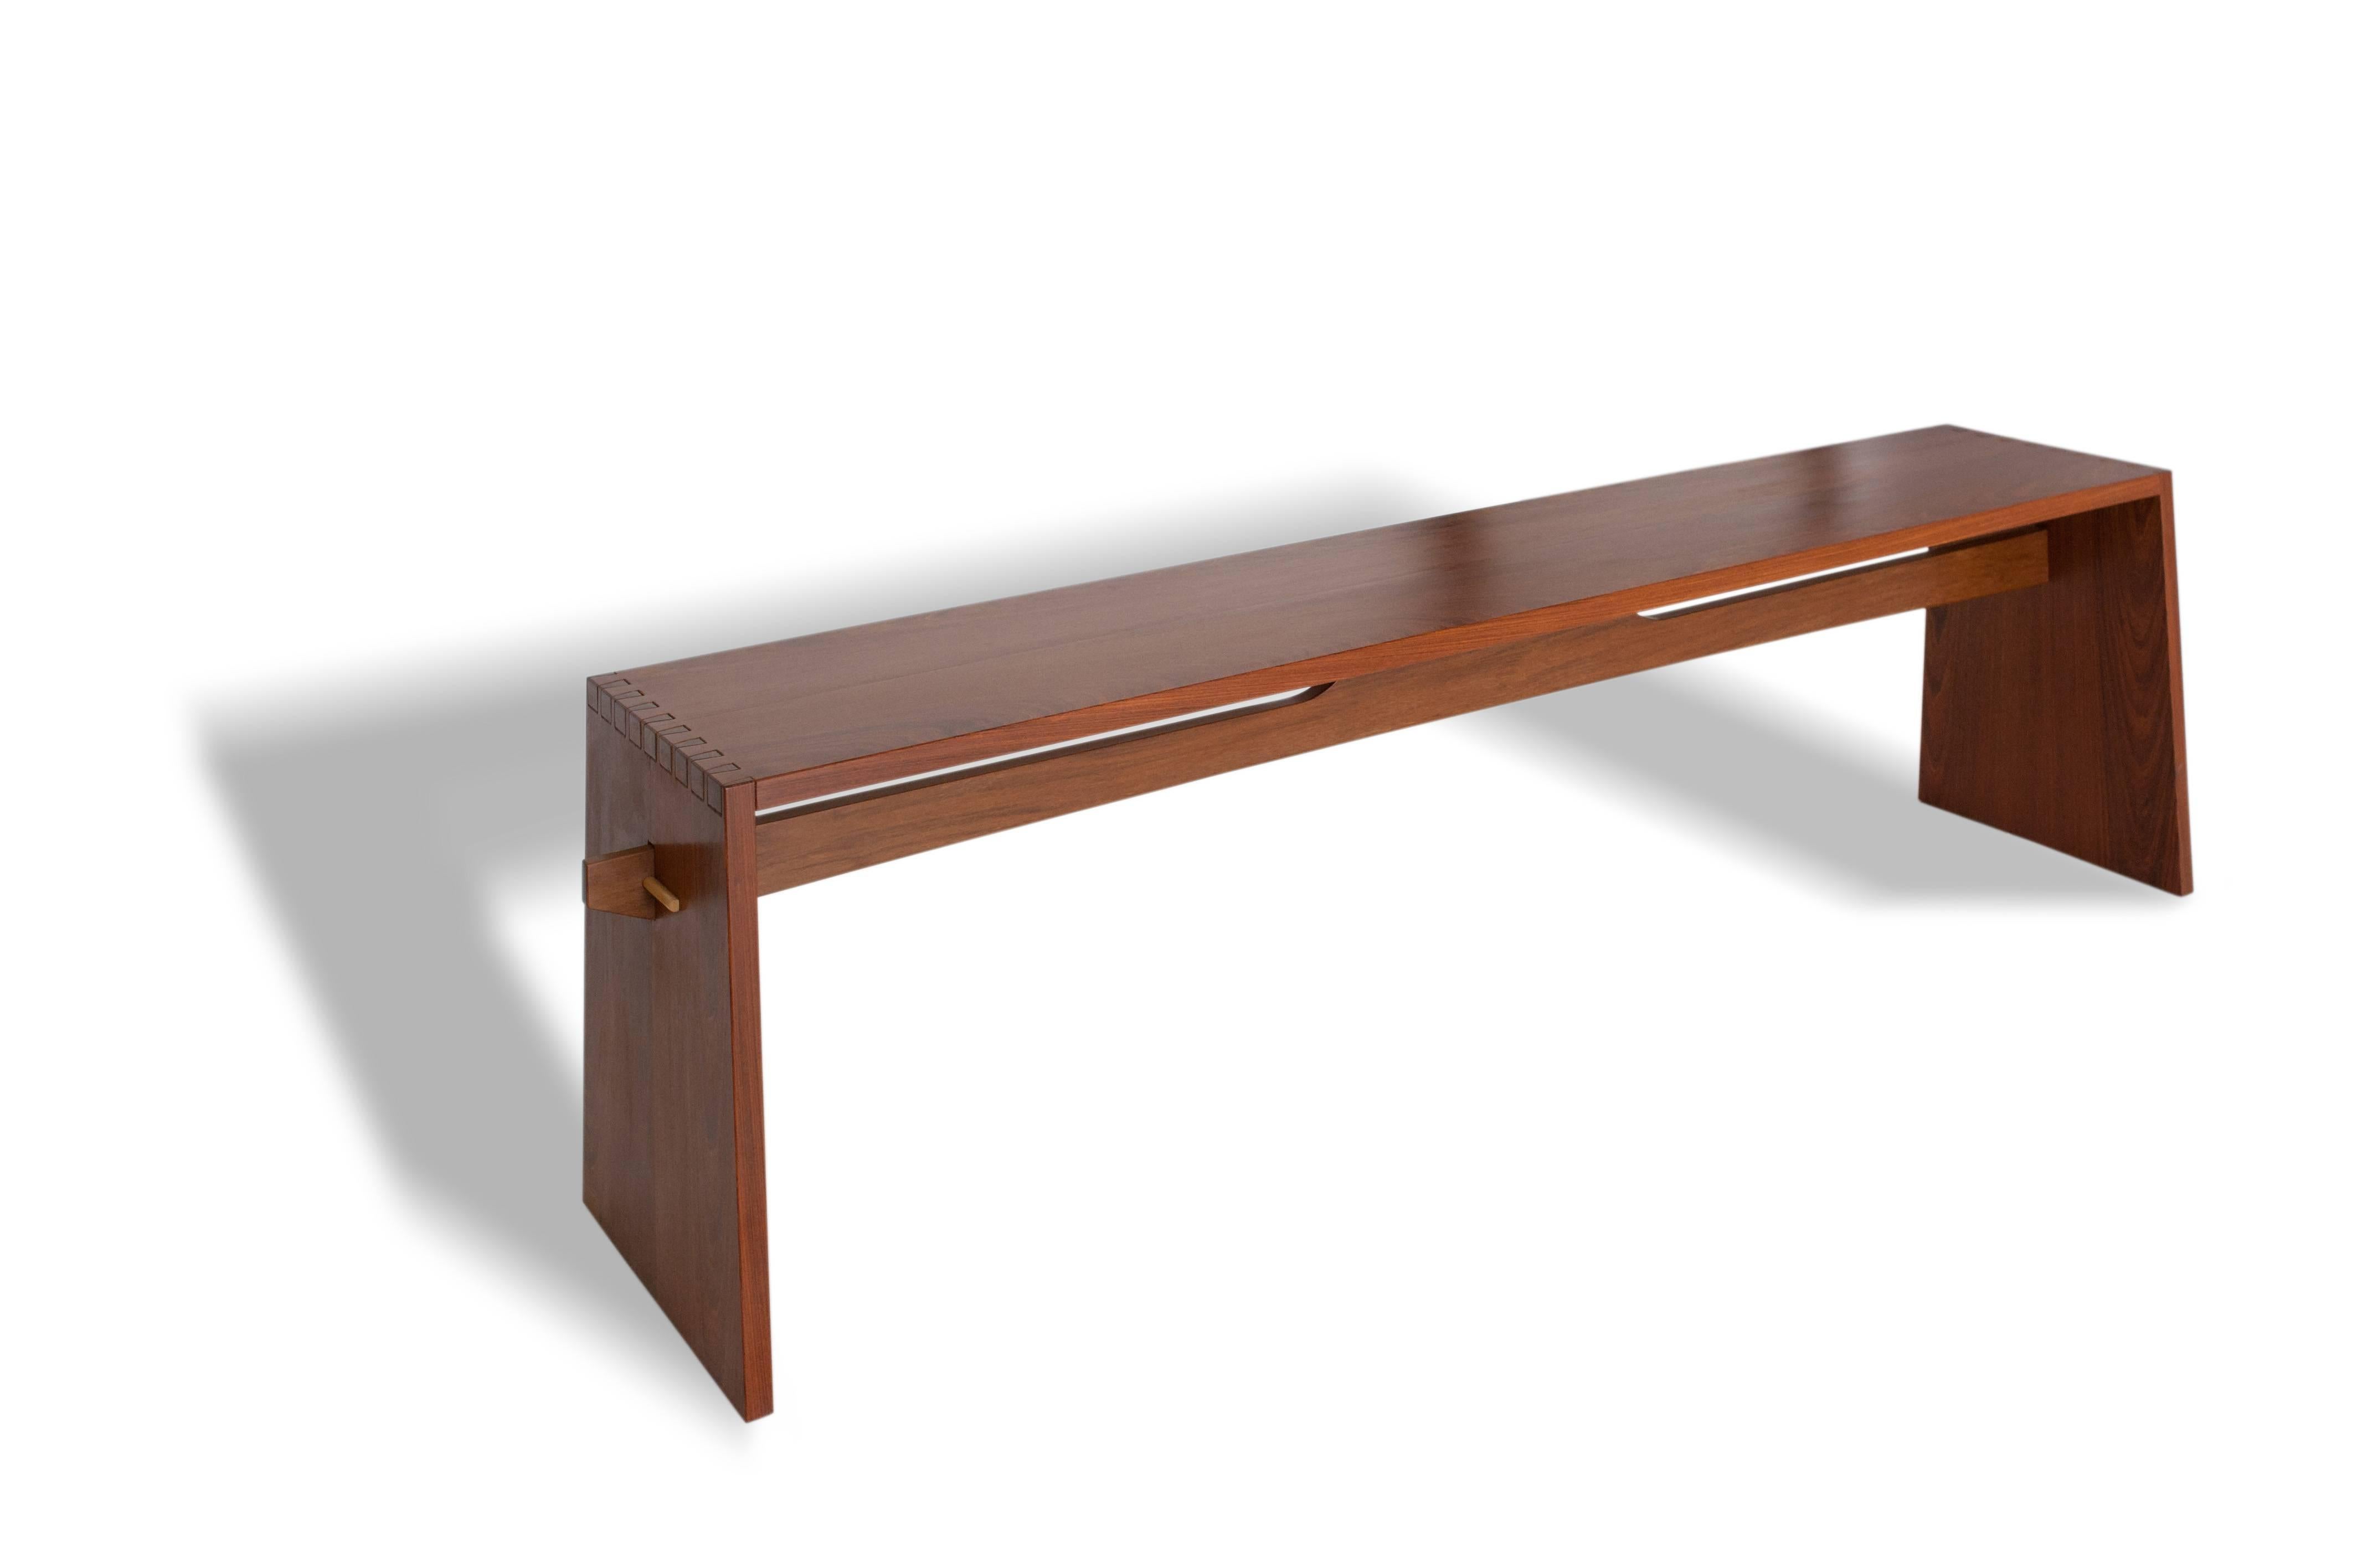 Tropical Brazilian hardwood bench, hand crafted in a contemporary style made with angled dovetail and spindle joints.

The beauty of tropical hardwood joined in traditional way with dovetails and 
Measurements are customized by demand.